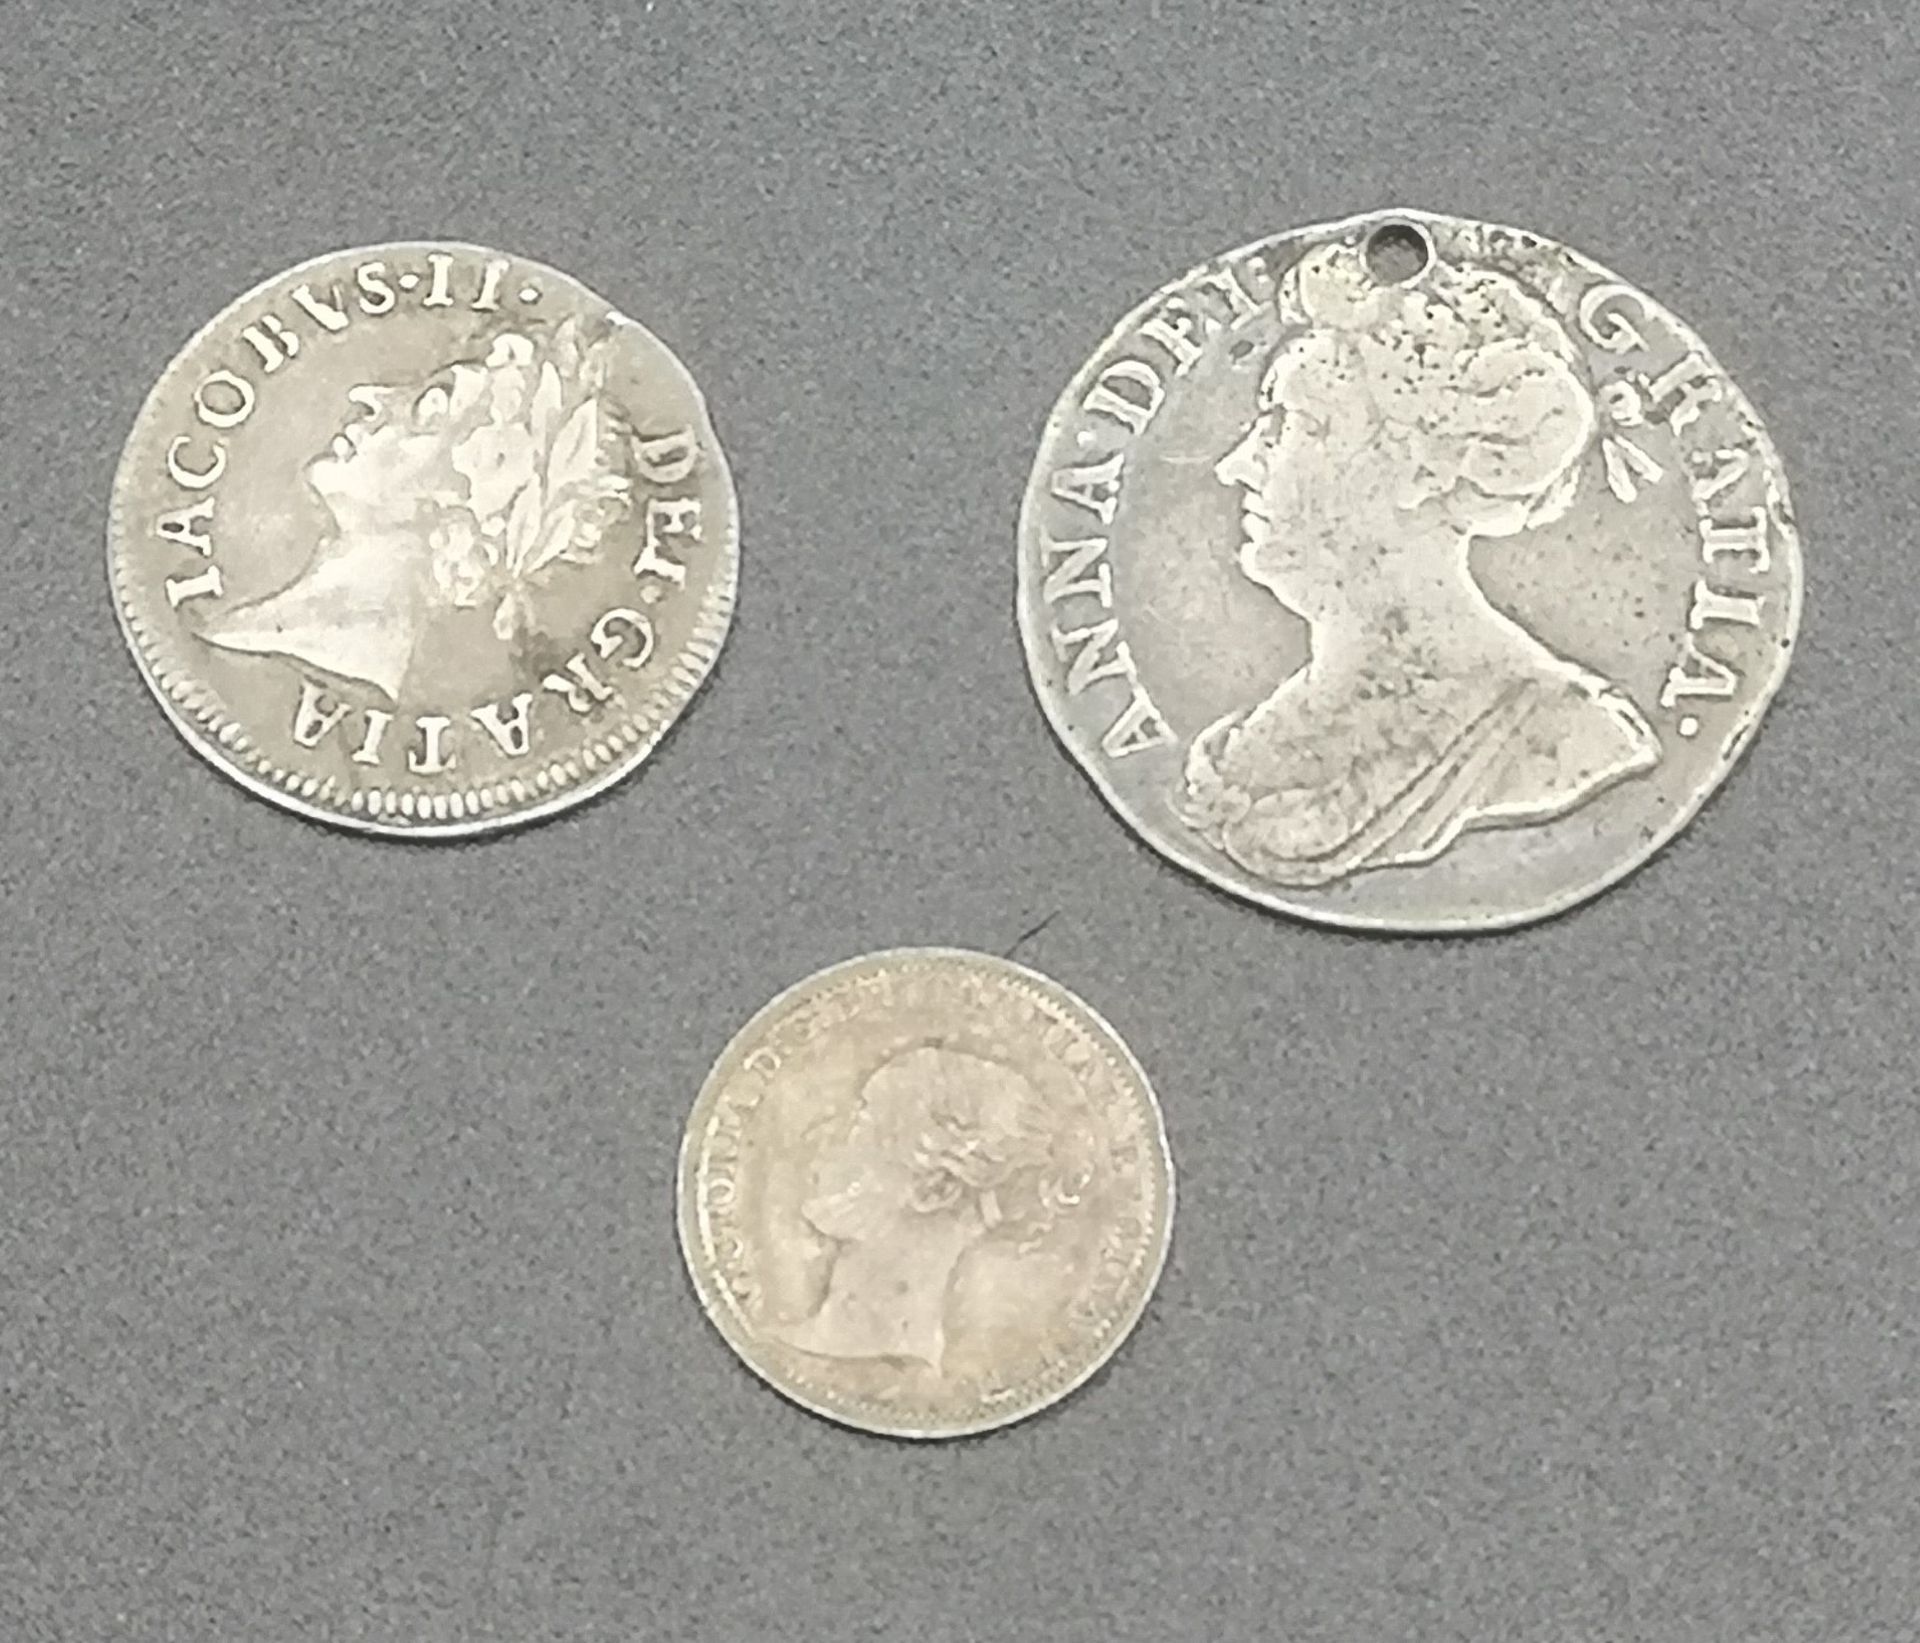 17th, 18th and 19th century Maundy coins - Image 6 of 6